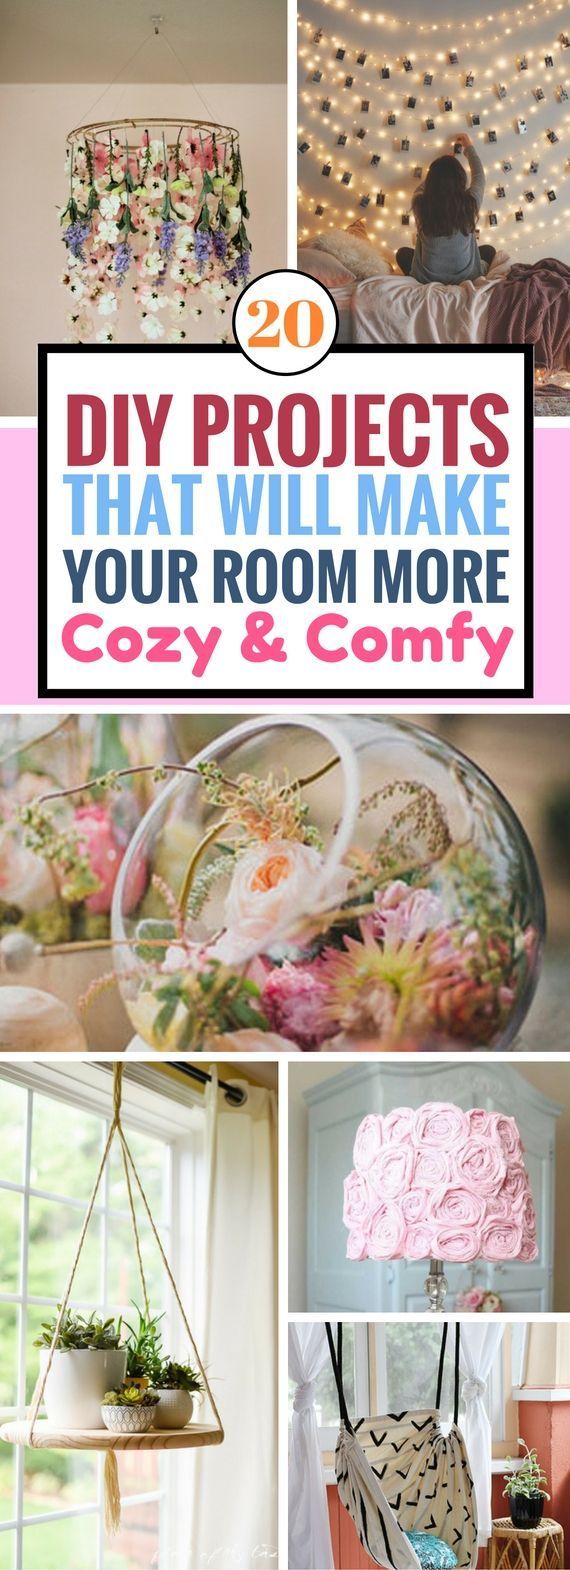 20 DIY Bedroom Project Ideas For A More Cozy And Comfy Room -   13 room decor Art string lights ideas